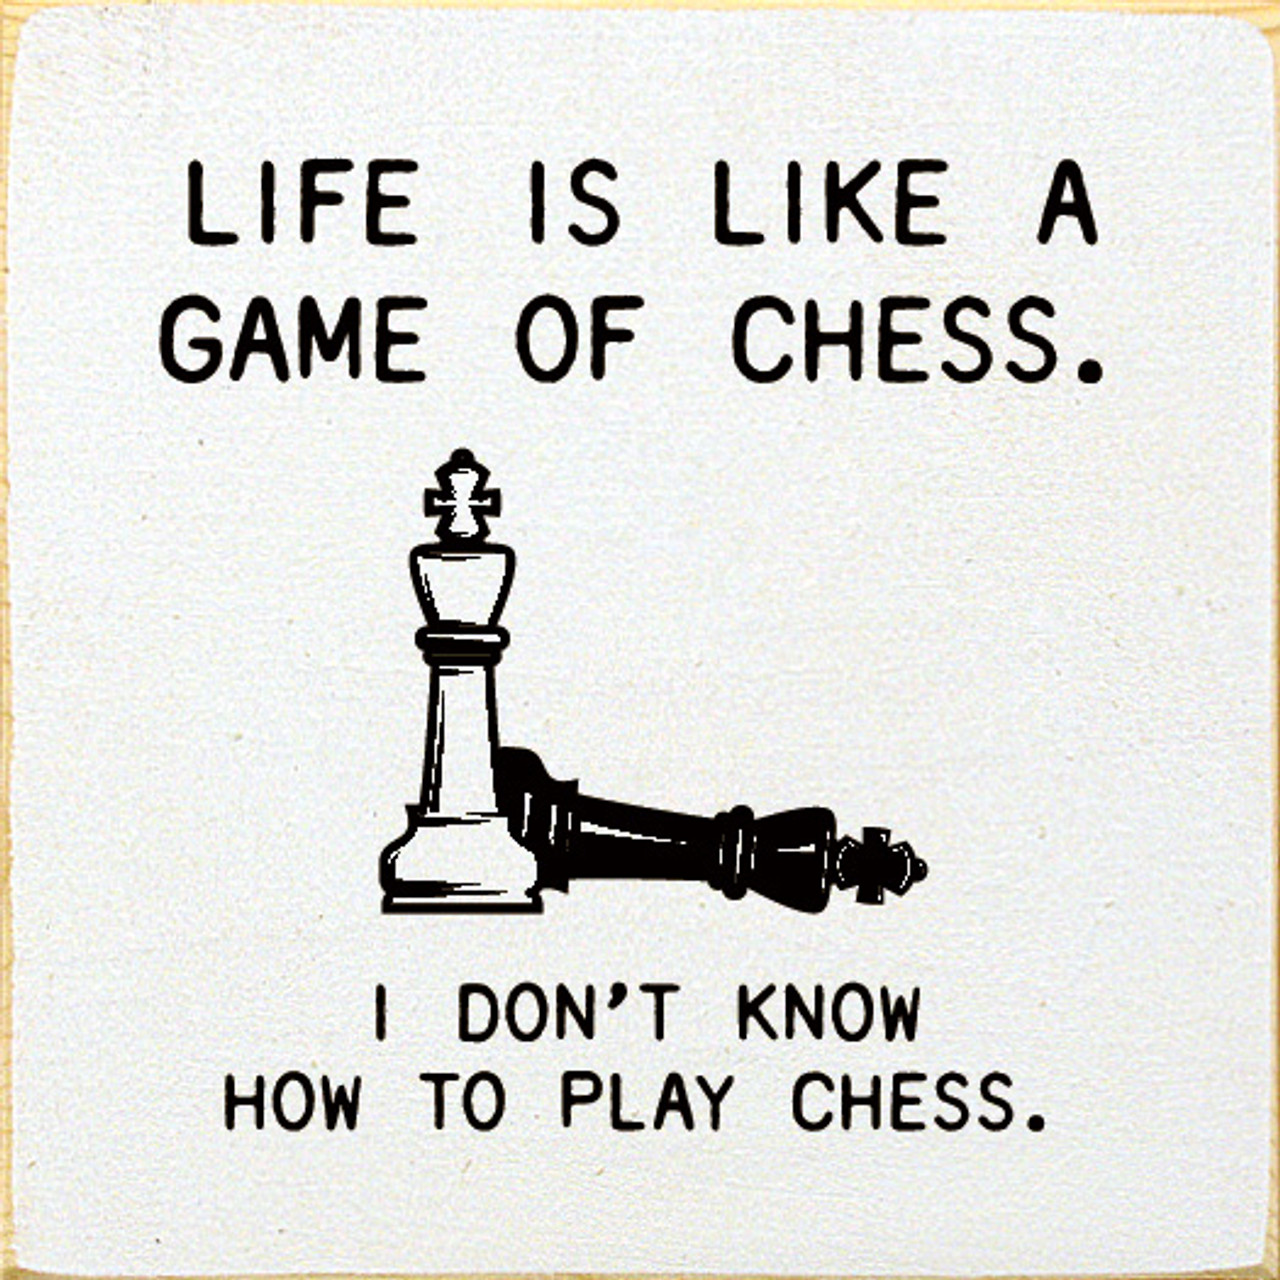 Should I Treat My Dating Life Like A Chess Game?